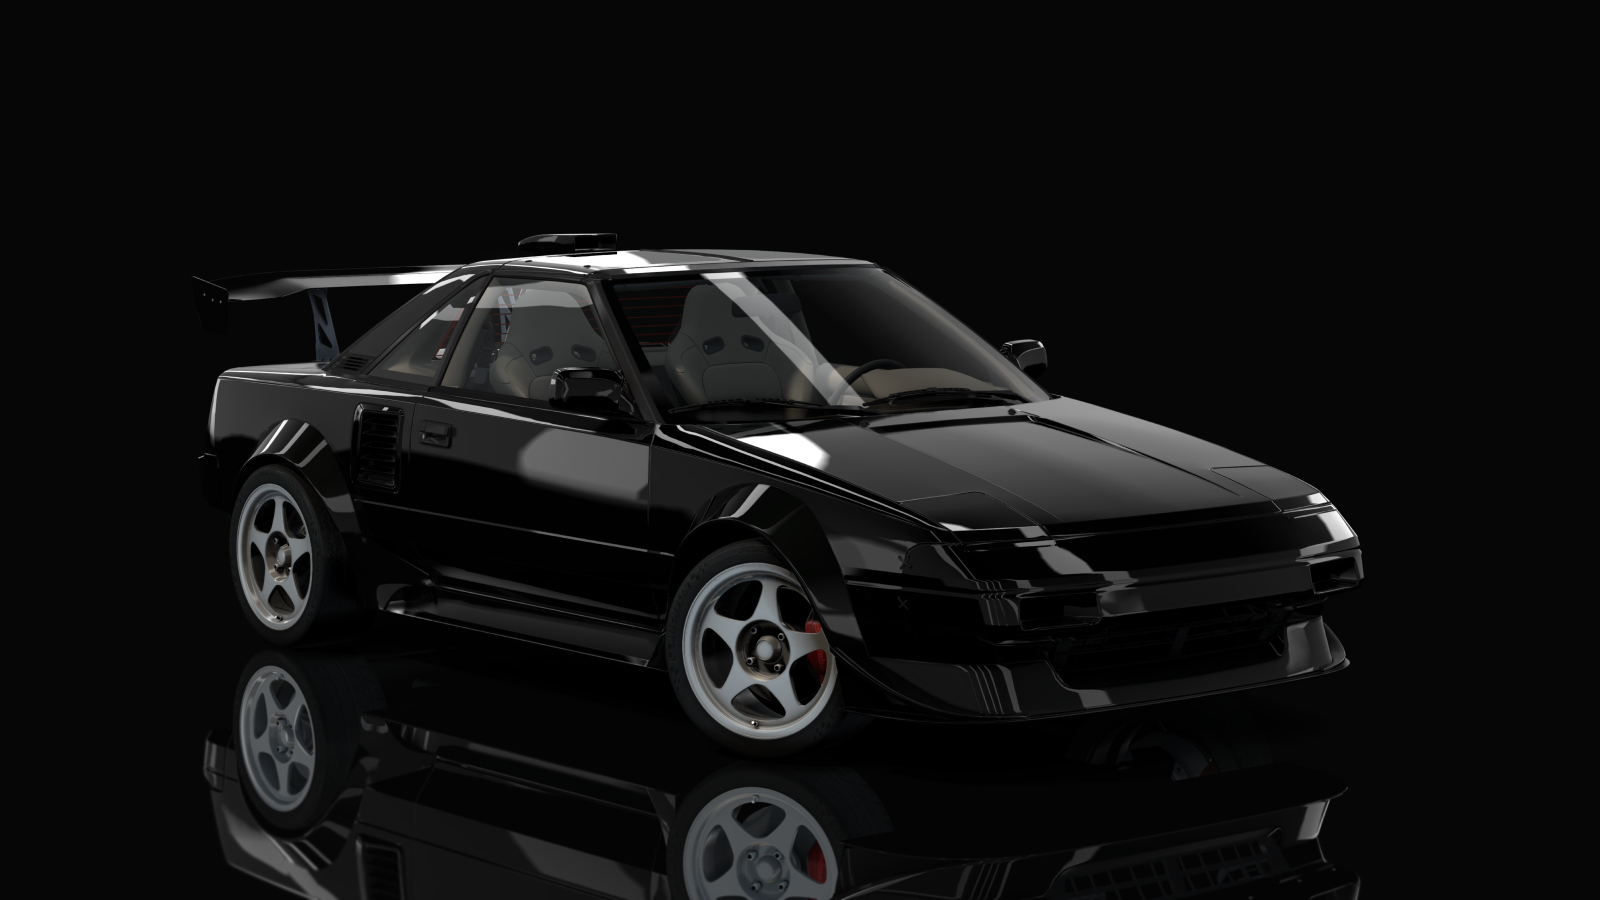 Toyota MR2 SC AW11 Time Attack Preview Image